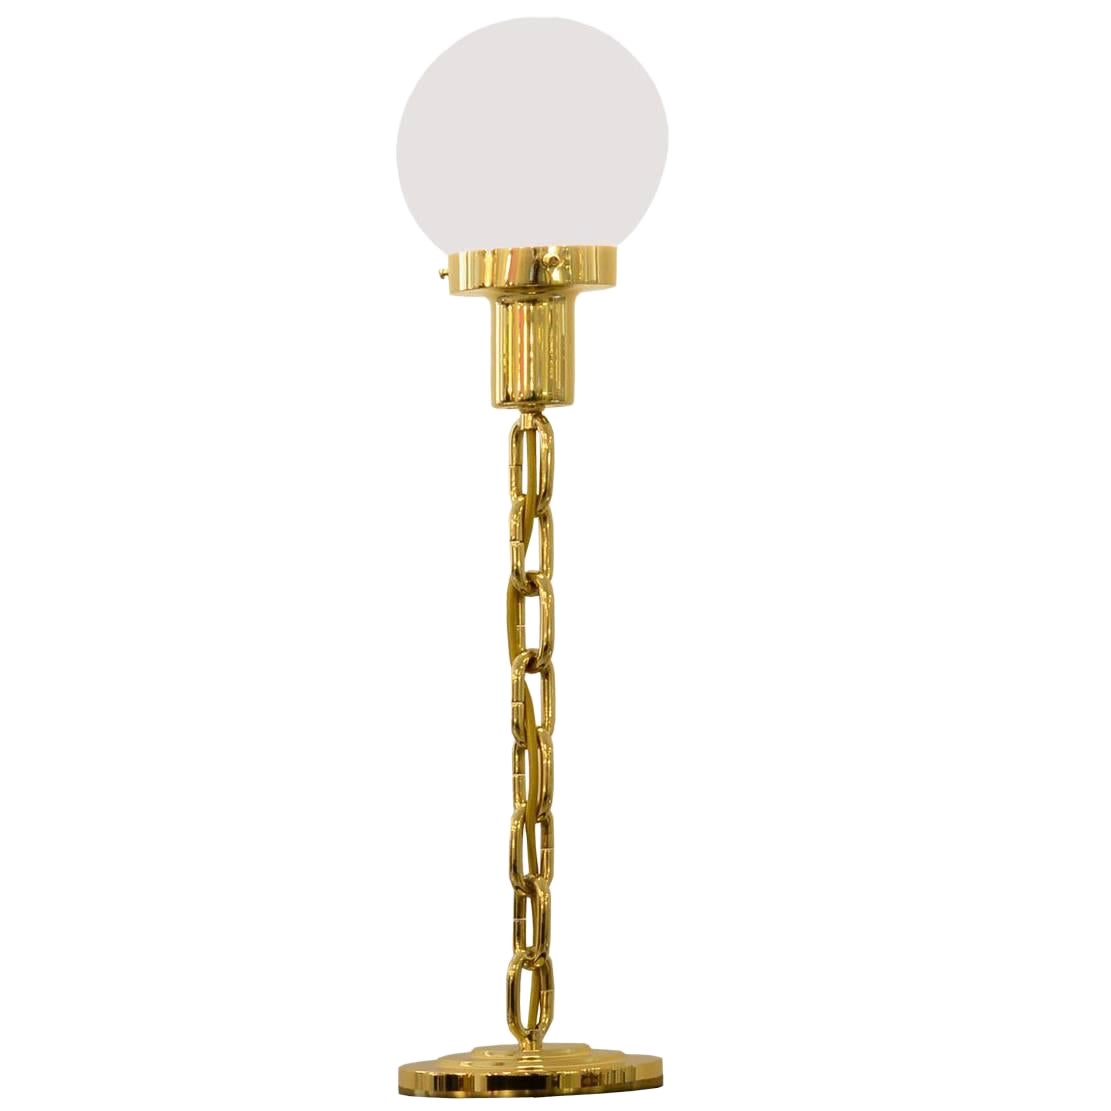 Hommage to Franz West, Woka Brass Table Lamp "Go West", Re-Edition For Sale